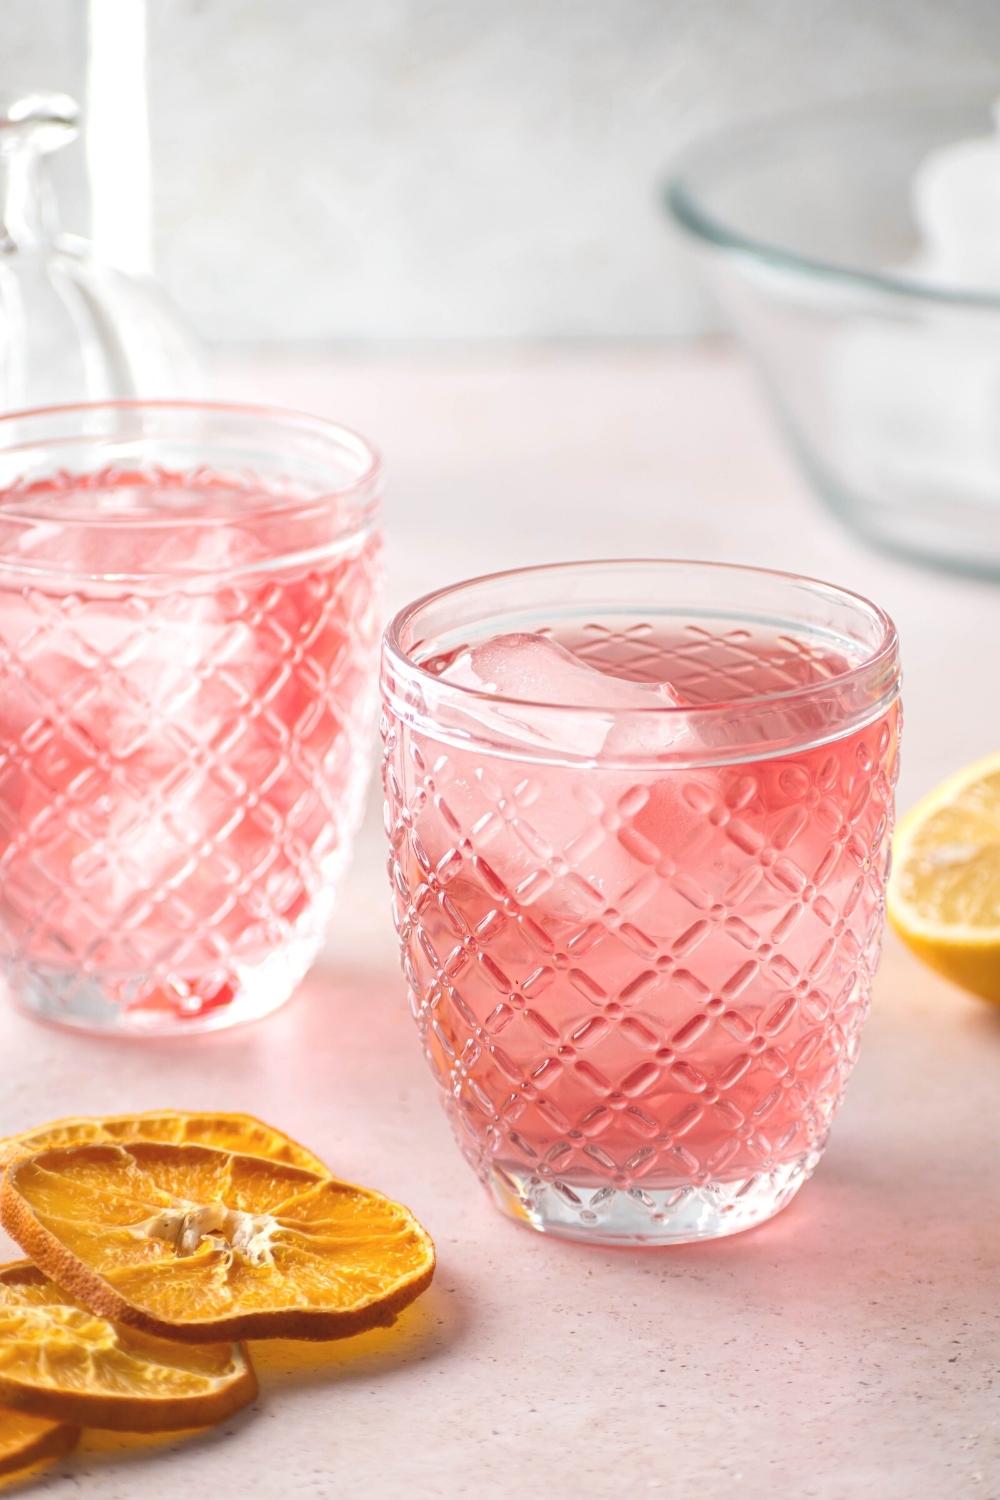 Two glasses filled with pink lemonade vodka and some ice cubes. There are a few lemons next to the glasses.